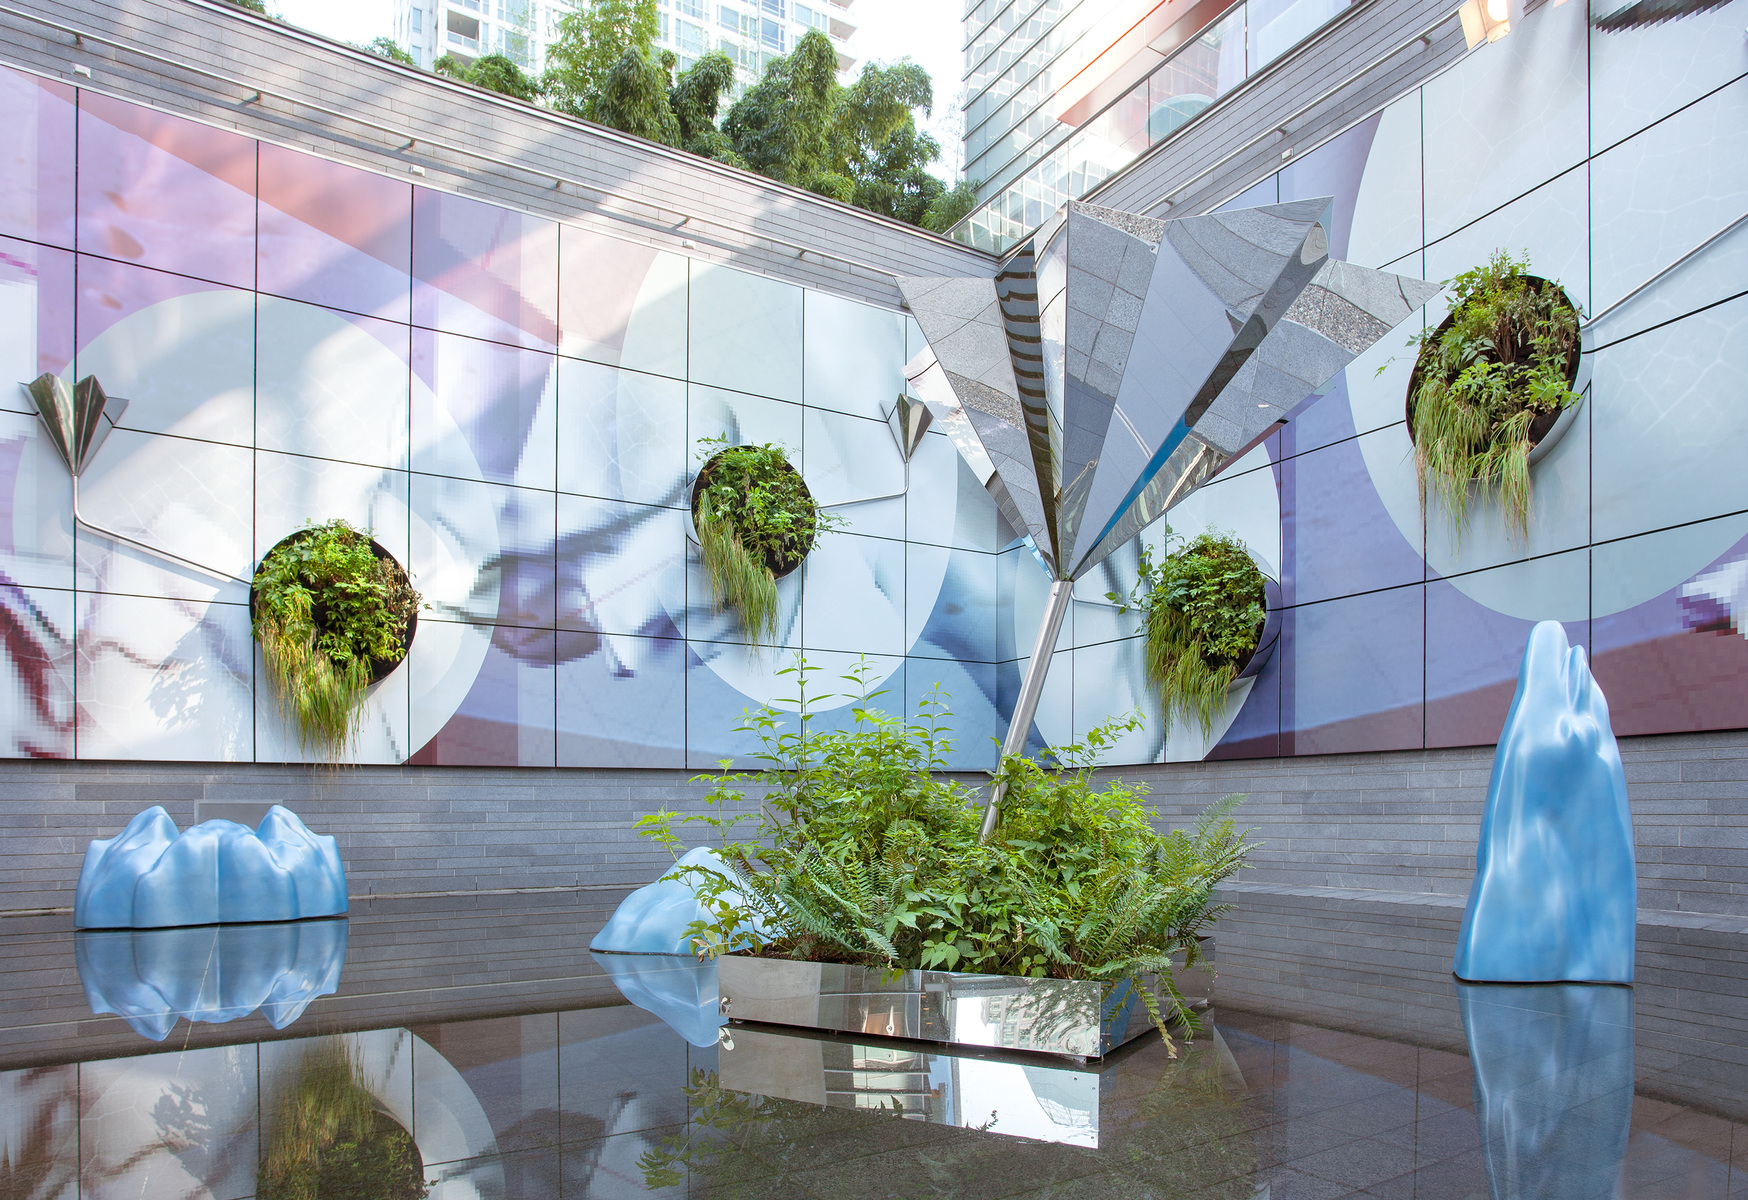 Installation view of "All That Melts",  reflective architectural vernacular with mirror-polished stainless steel planters, glossy reflecting pool where pearly-blue icebergs float in their own meltwater